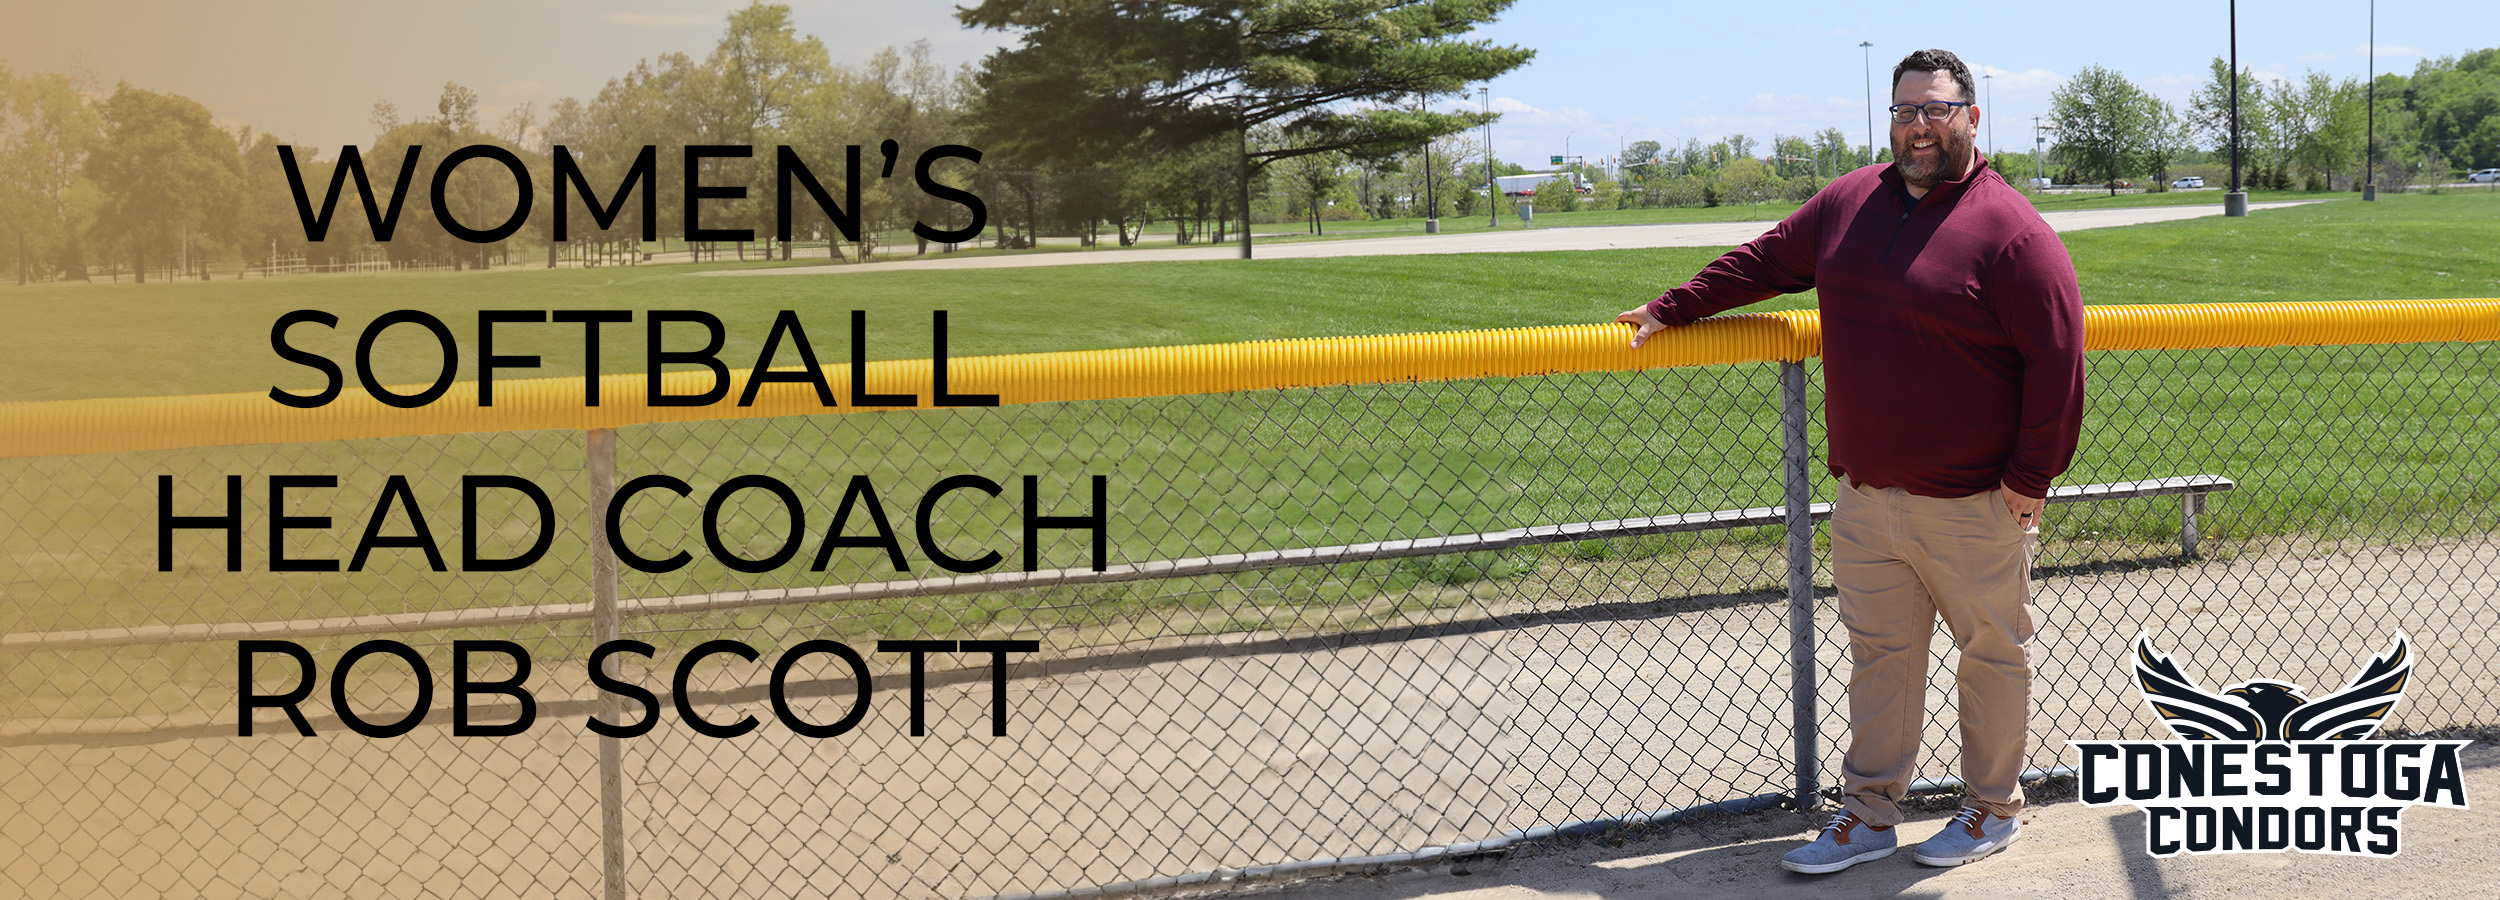 Head Coach of Softball Rob Scott stands in from of a fence on a softball diamond. The headline reads Women's Softball Head Coach Rob Scott.